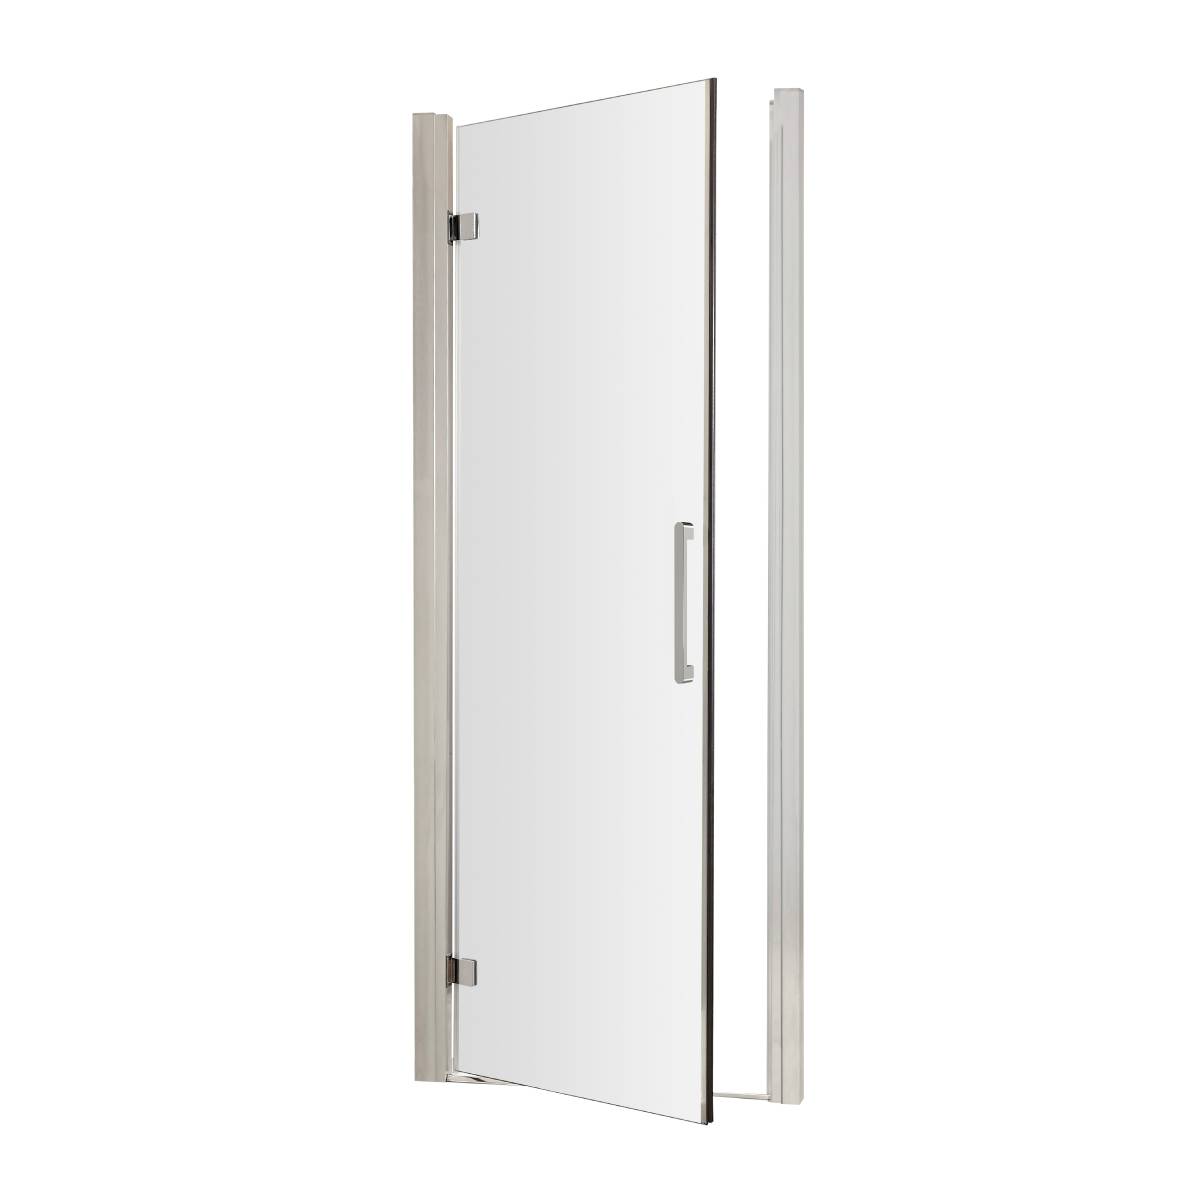 Hudson Reed Apex 900mm Hinged Shower Door with Round Handle MH90H4 (13372)